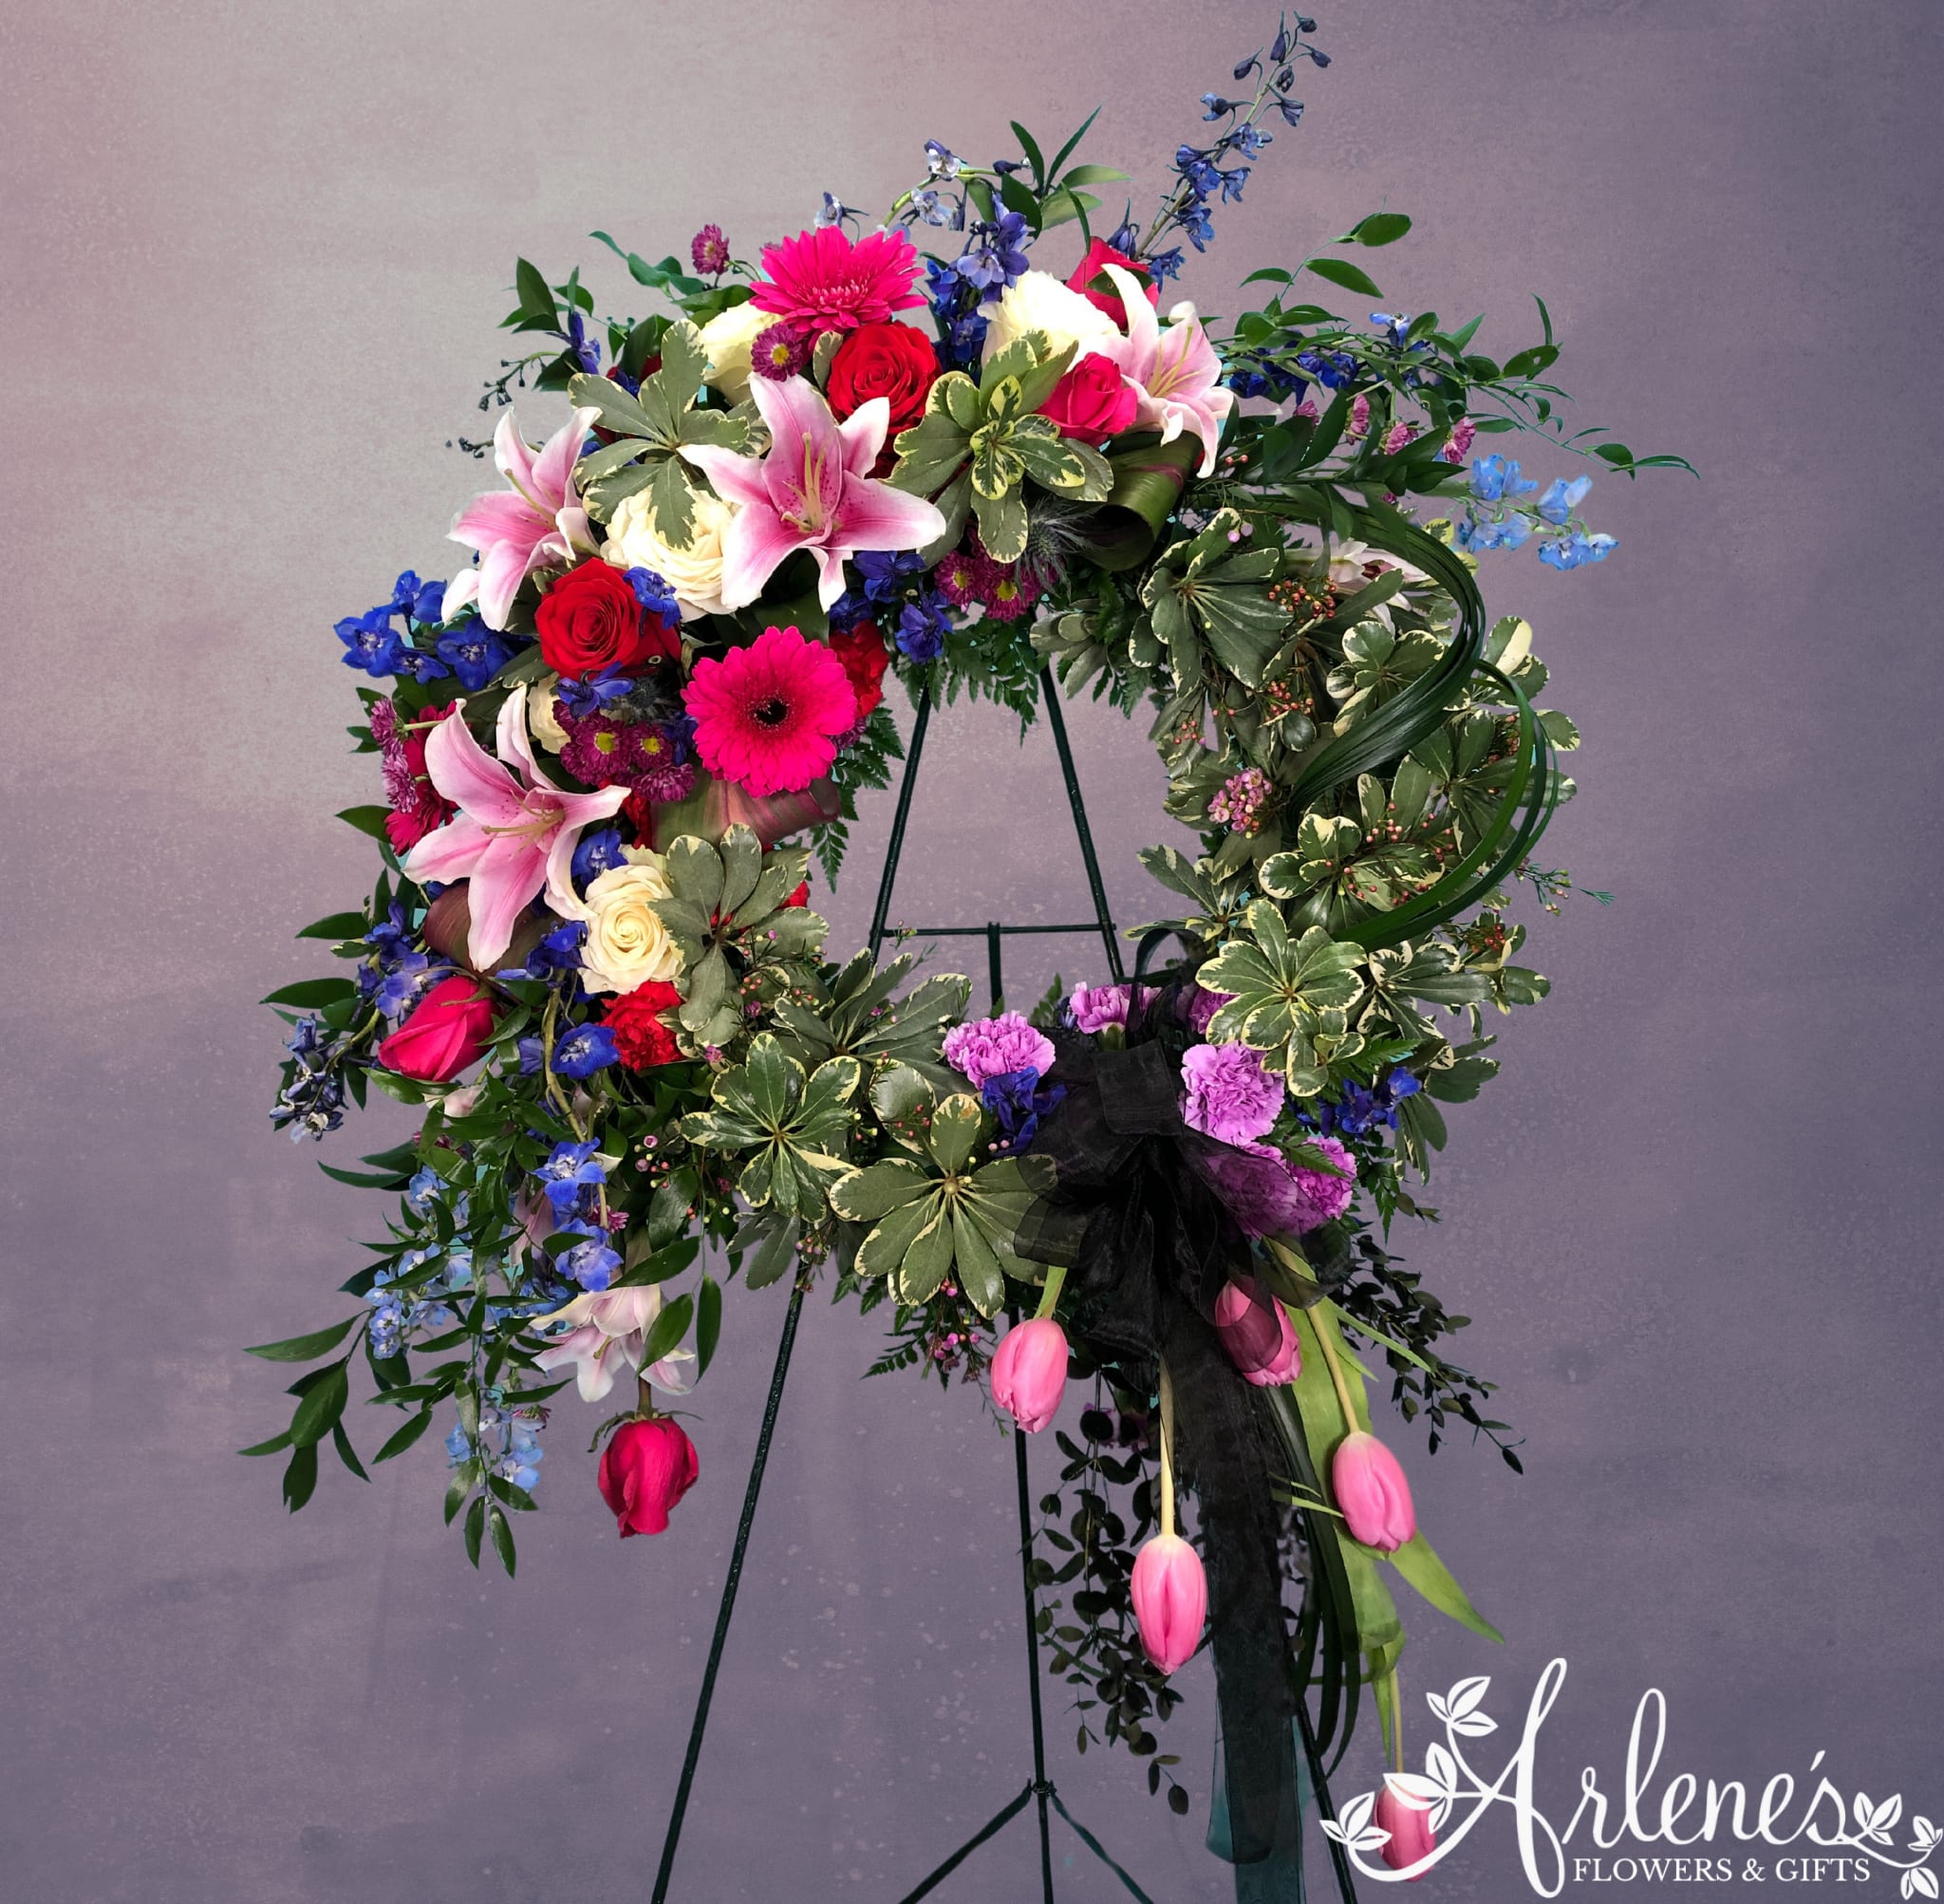 Sweet Lady Wreath - Missing you, sweet lady. This pink, purple, white and blue wreath is bold and dripping with tulips and sentiment. Send in memory a life of art, whimsy and impact.  